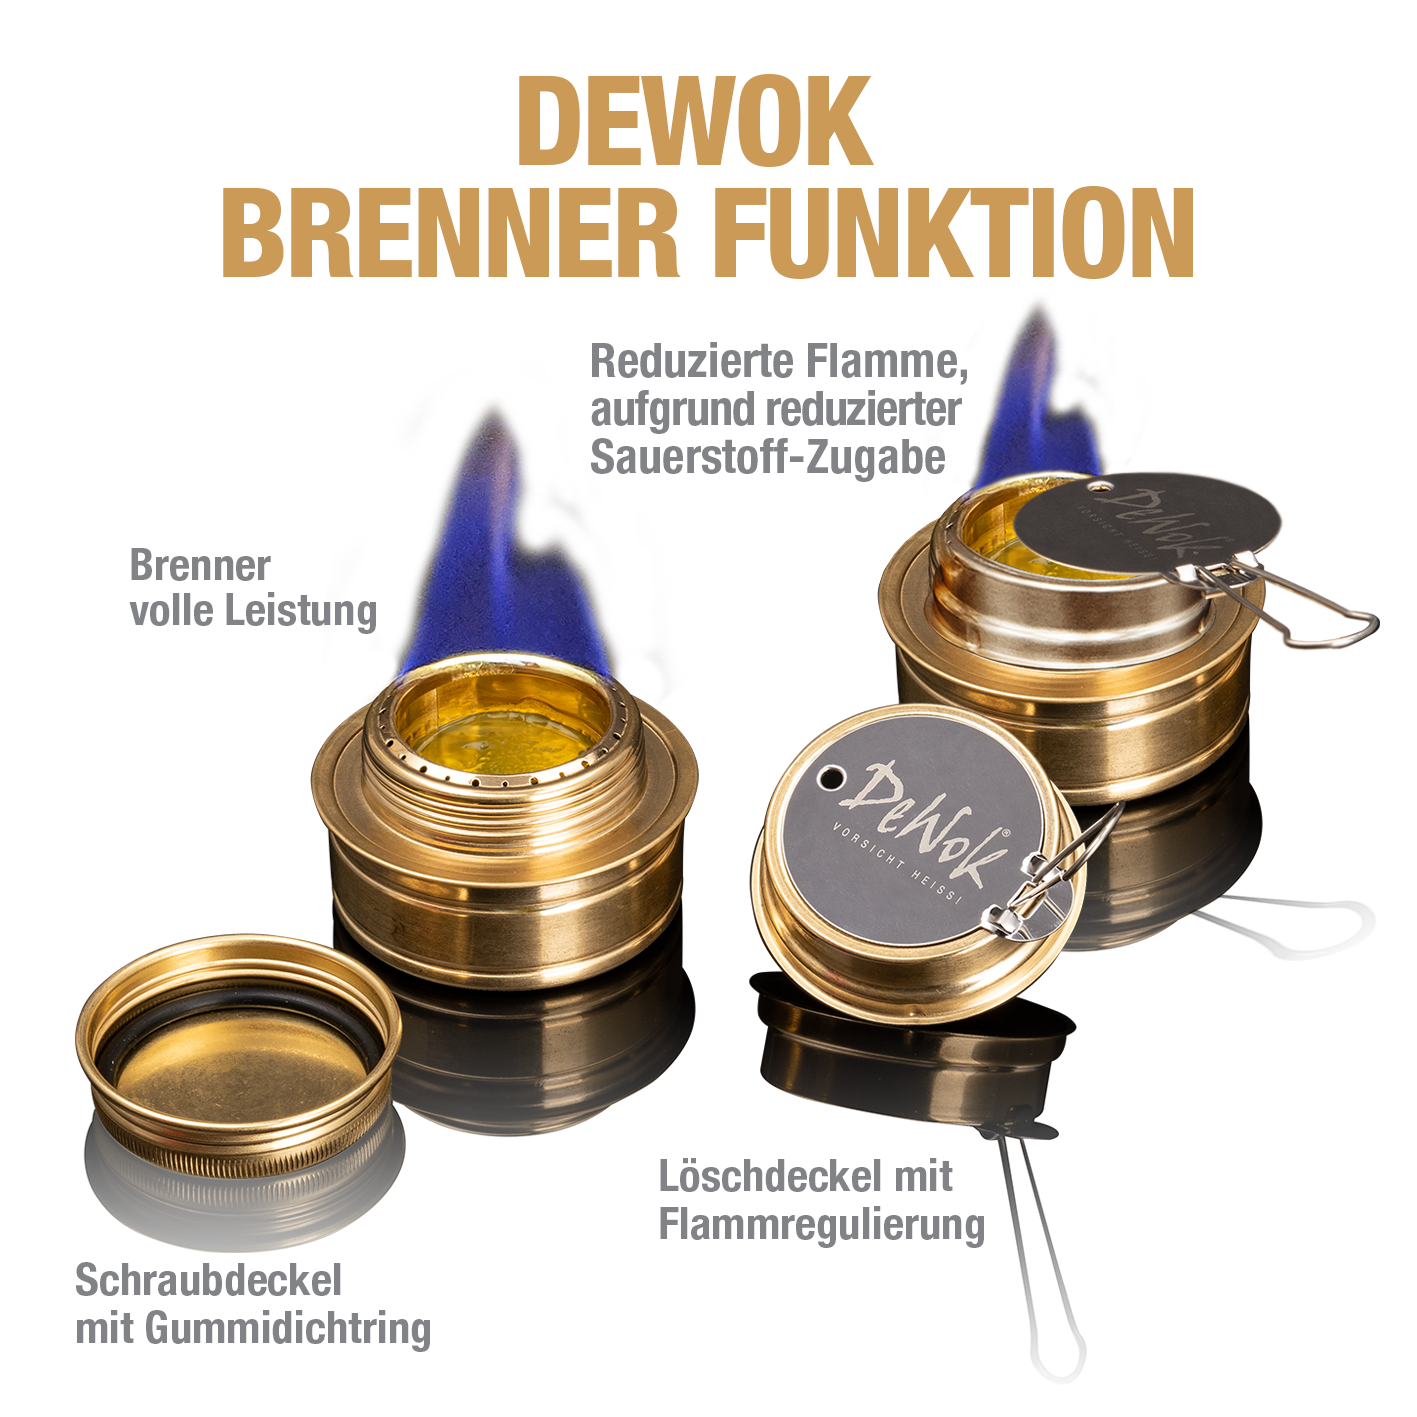 DeWok Camping & OUTDOOR package, cooking set for up to 4 people + 1L burning gel free.